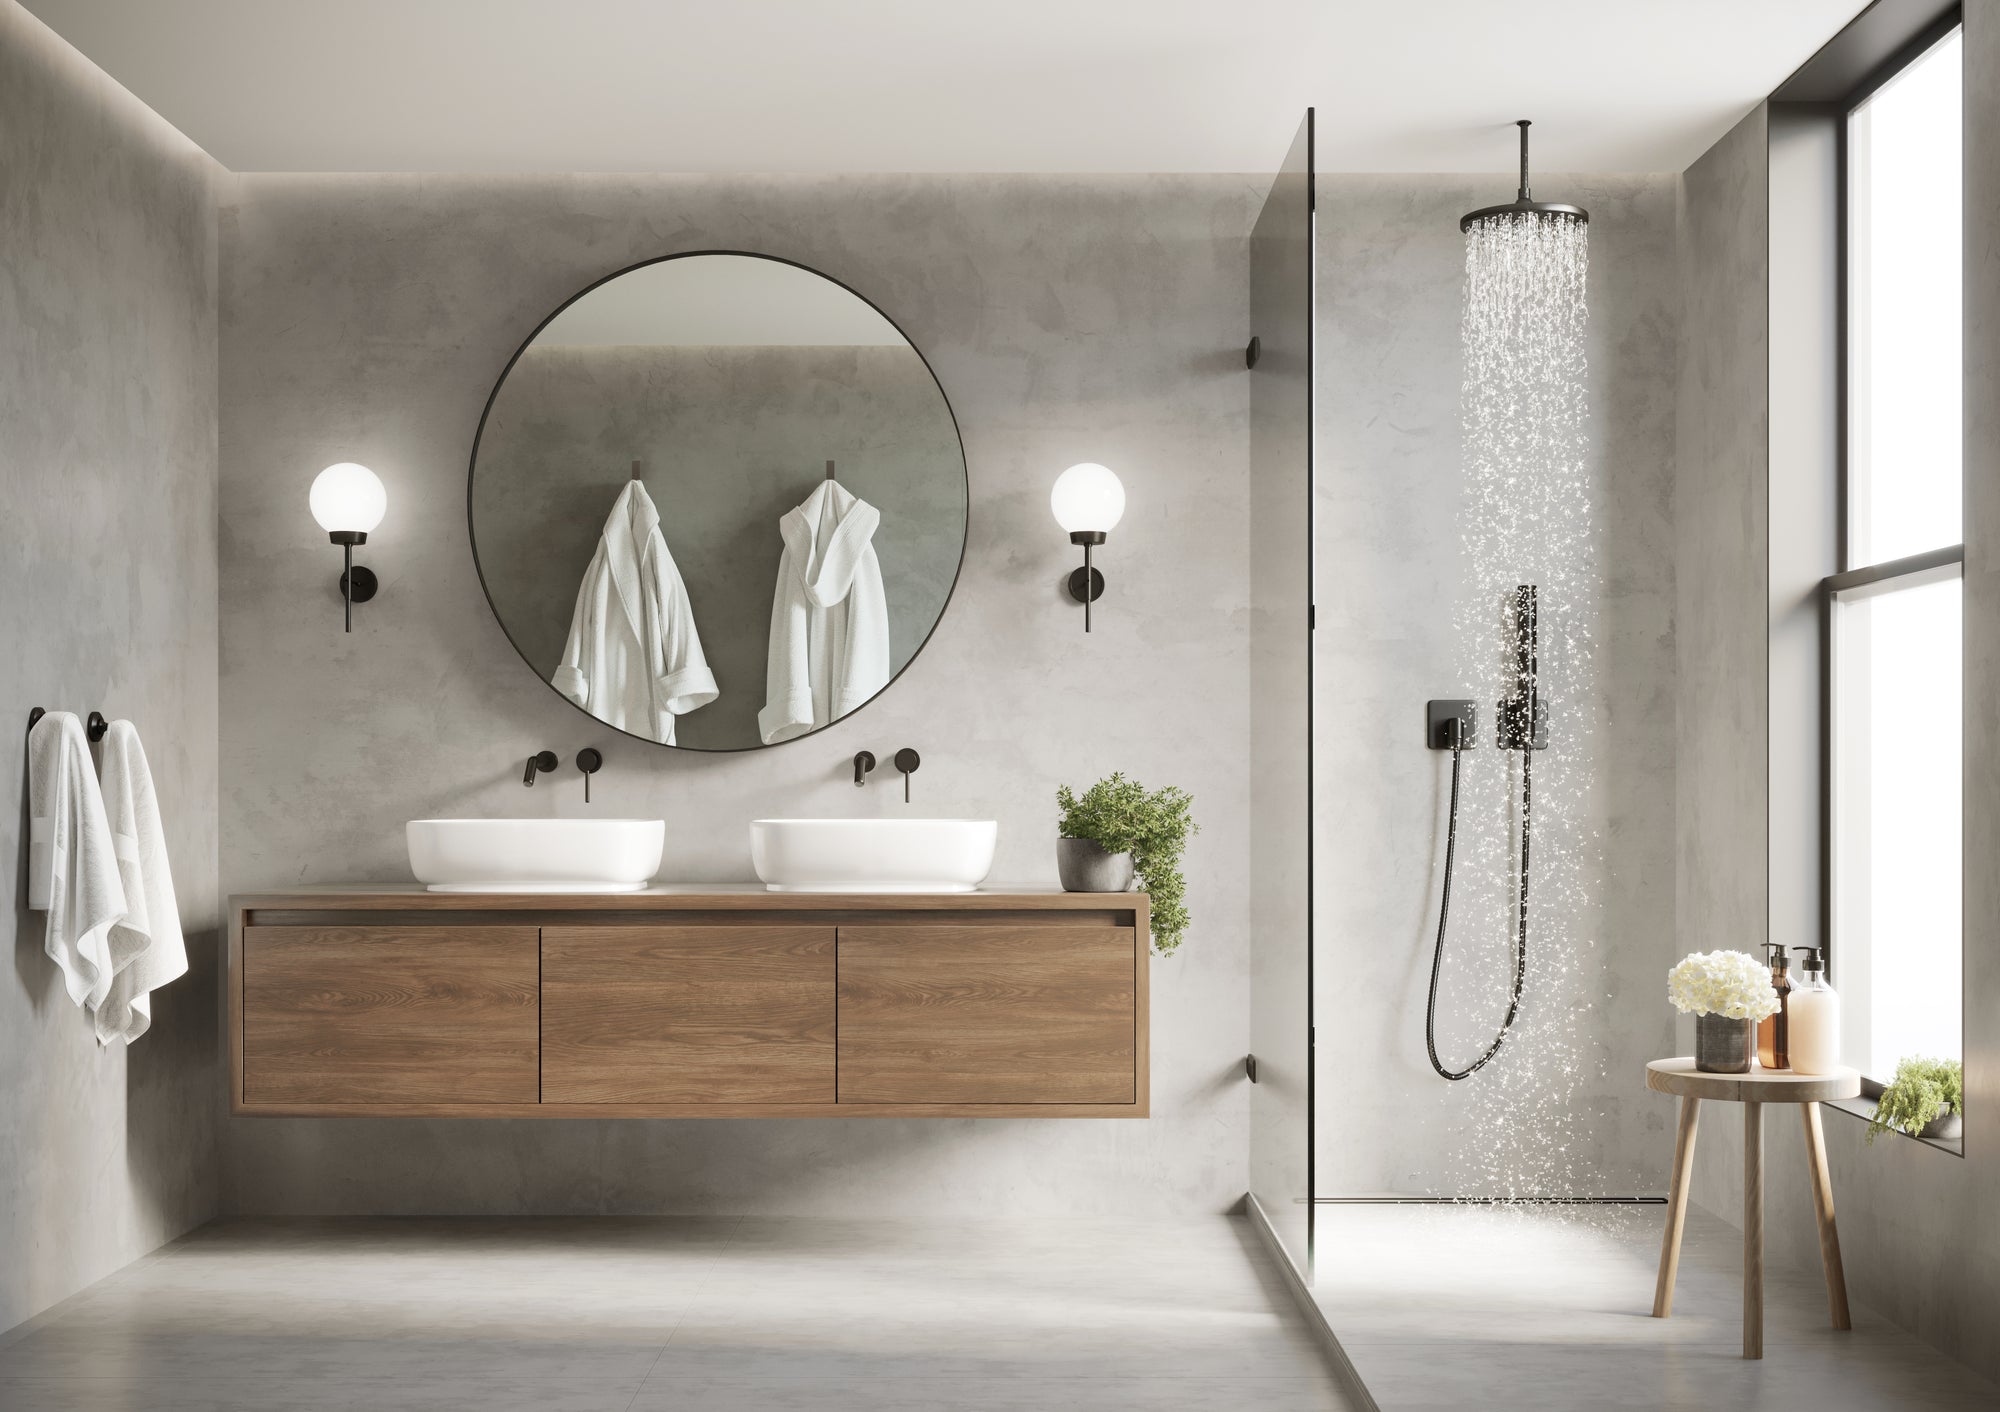 Luxury concrete bathroom with wooden vanity unit and black shower units and taps